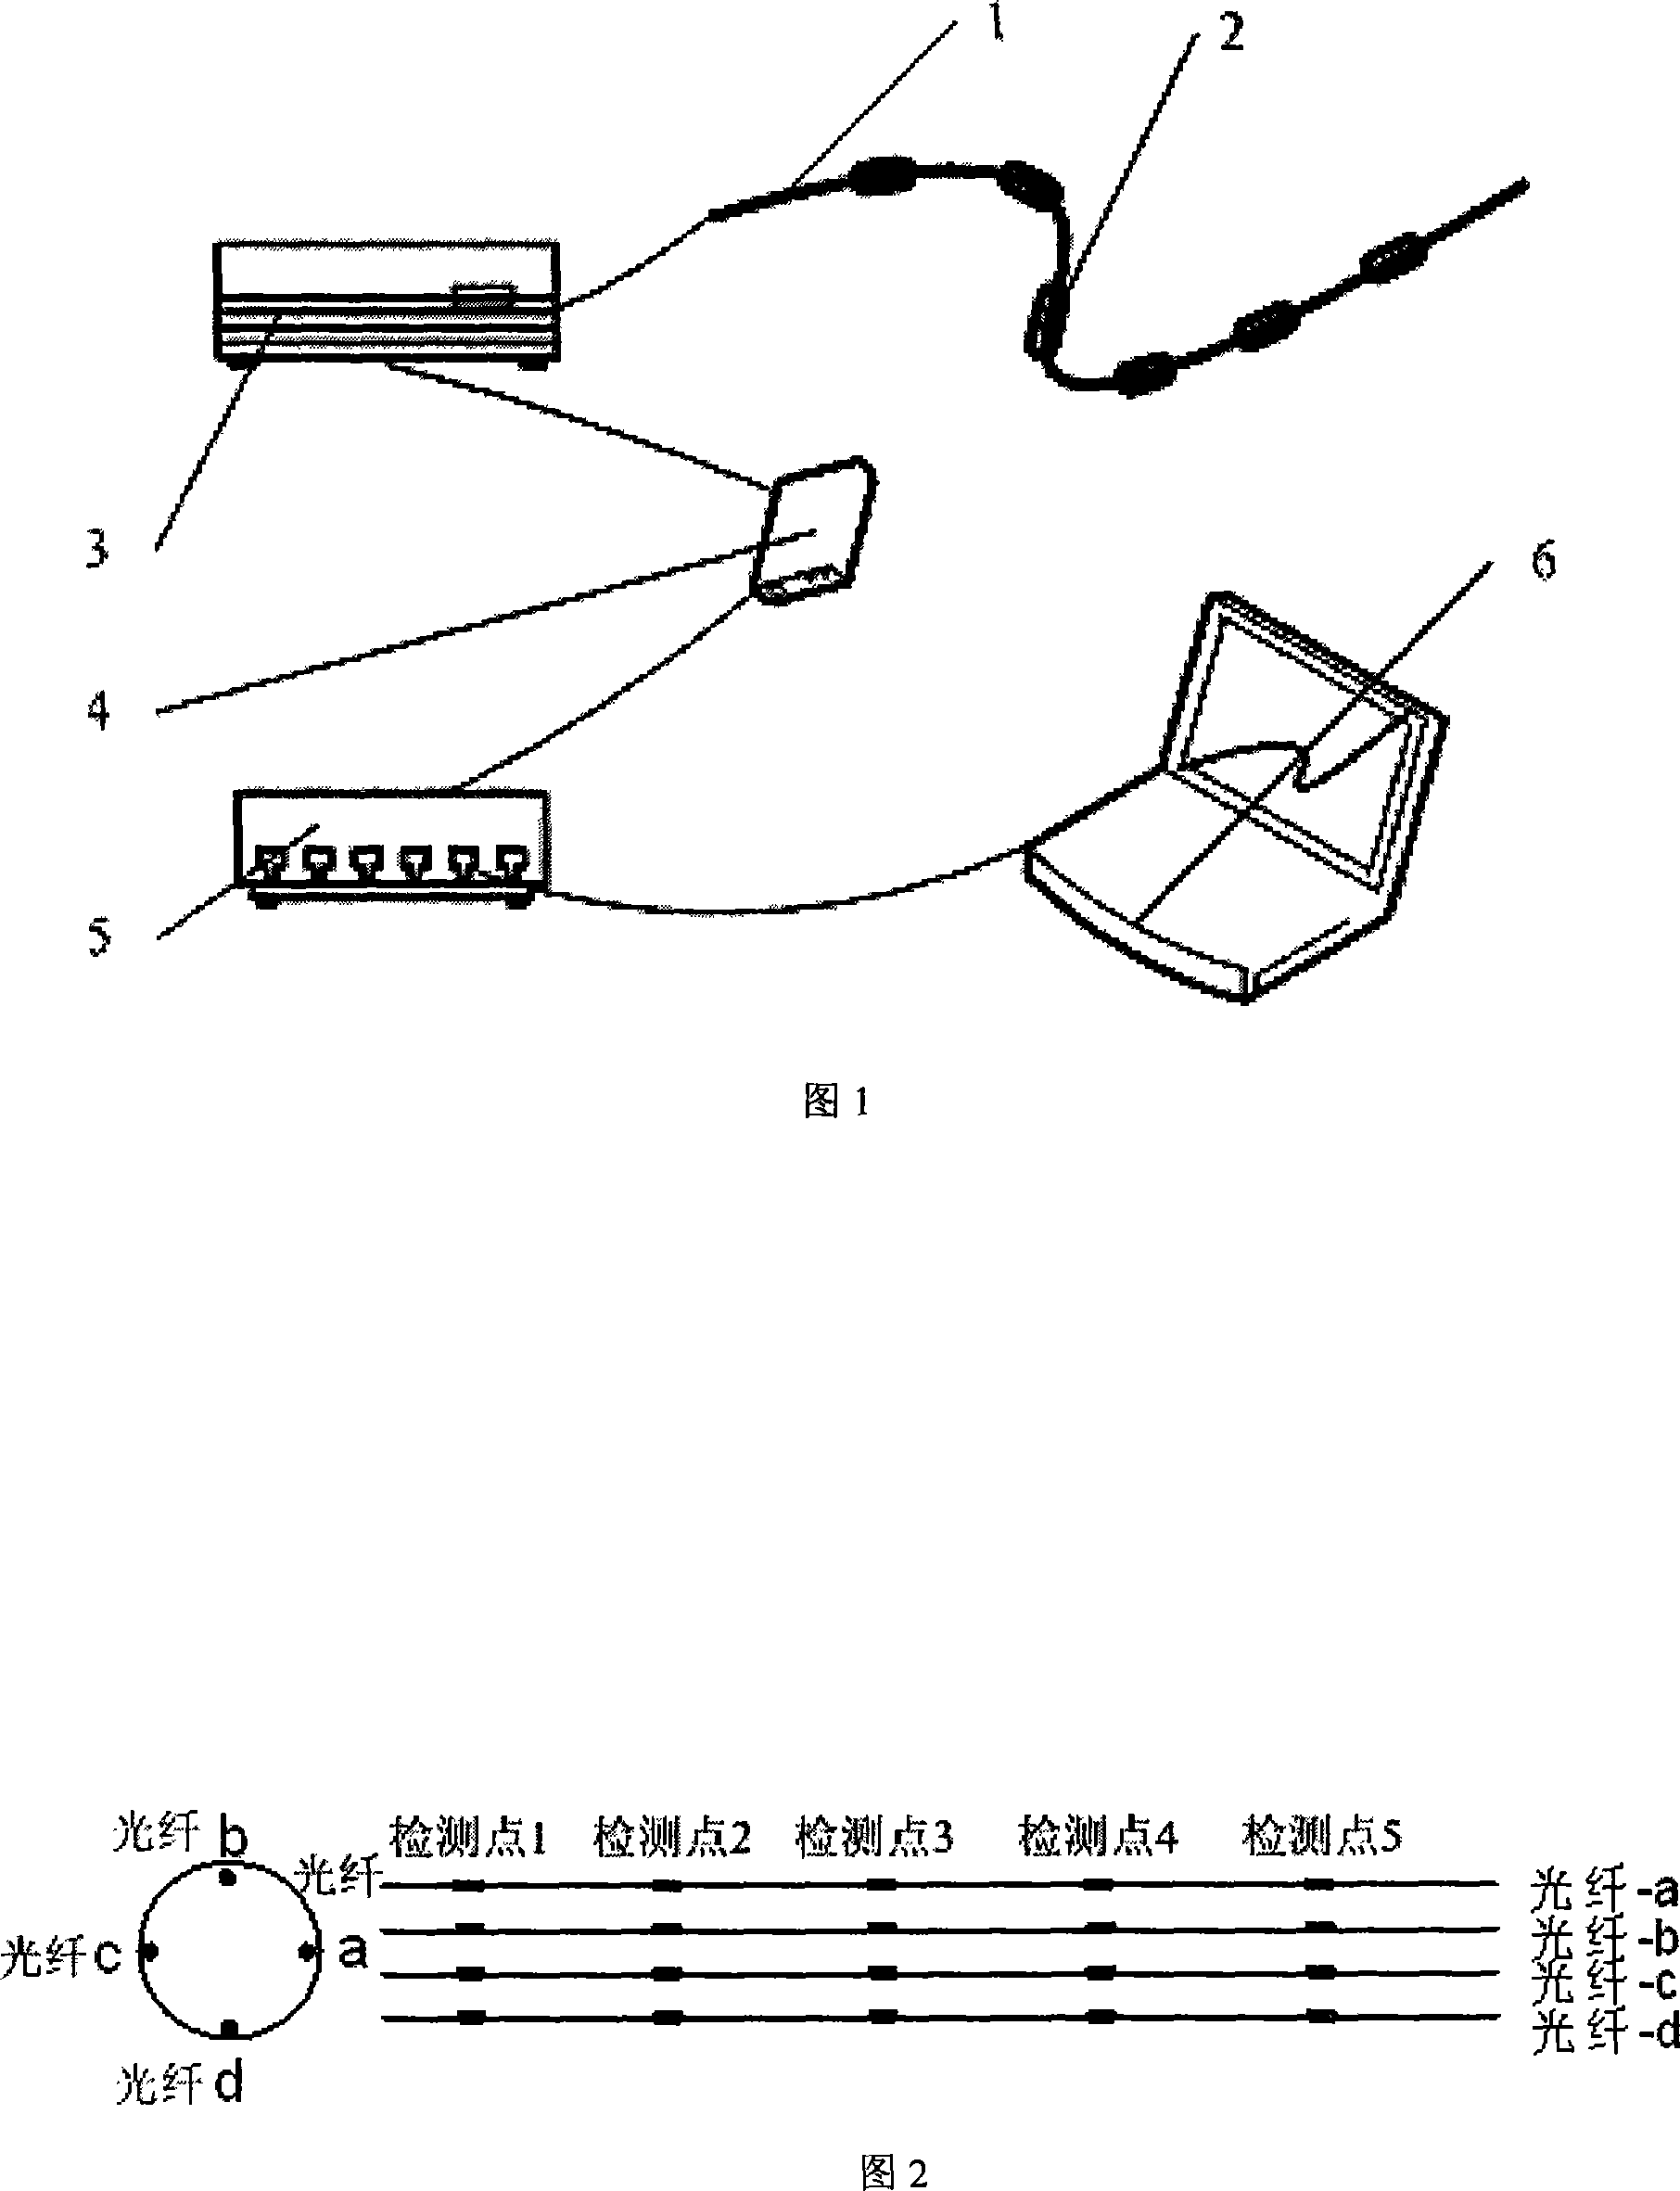 Thin long flexible rod spatial shape detecting device and method